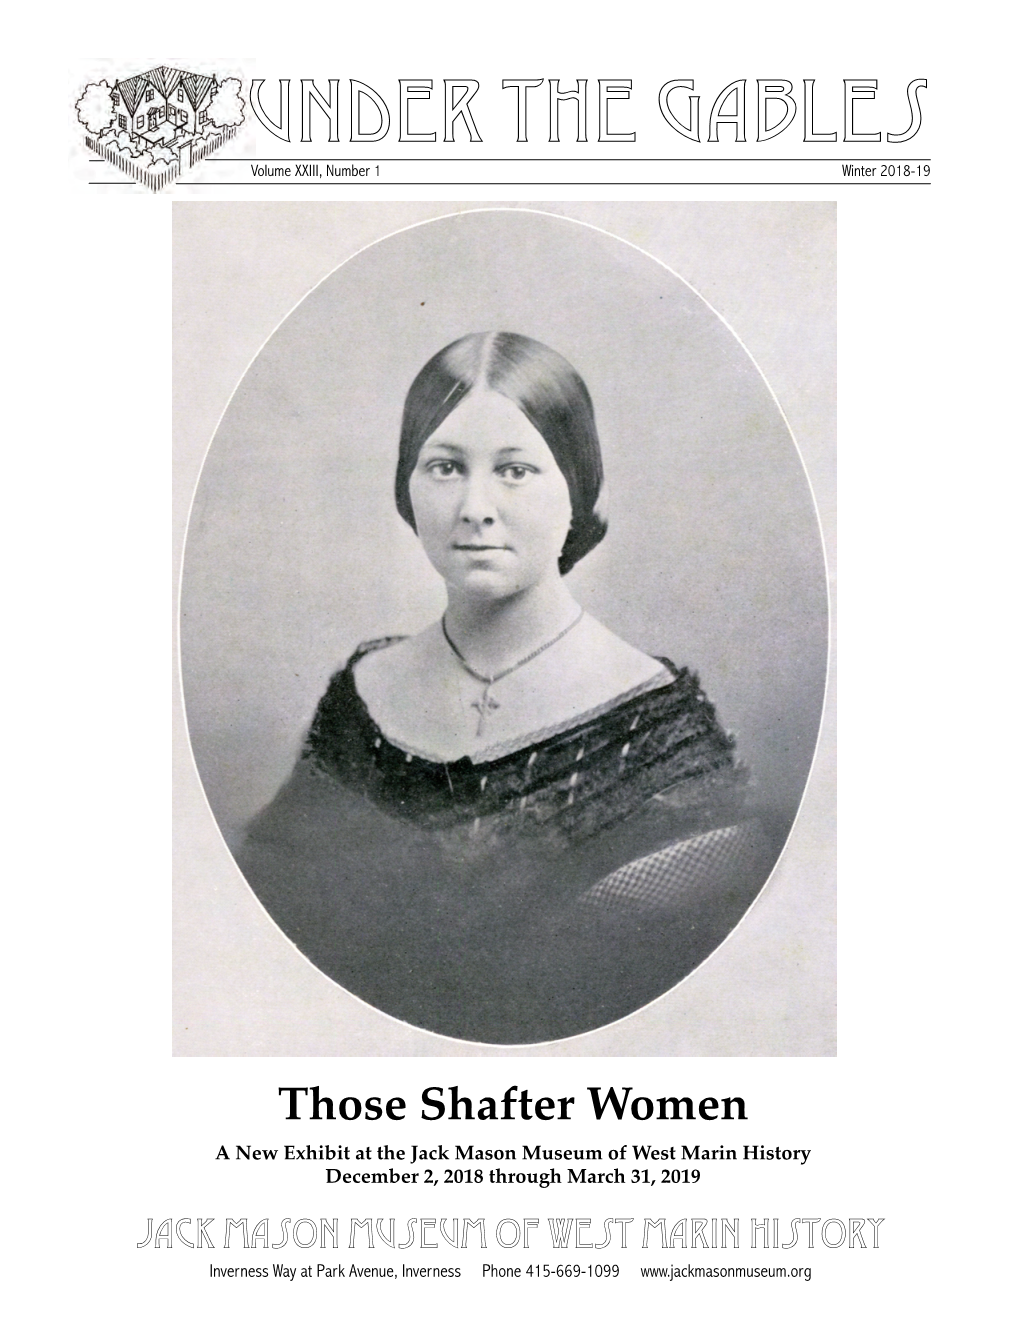 Those Shafter Women